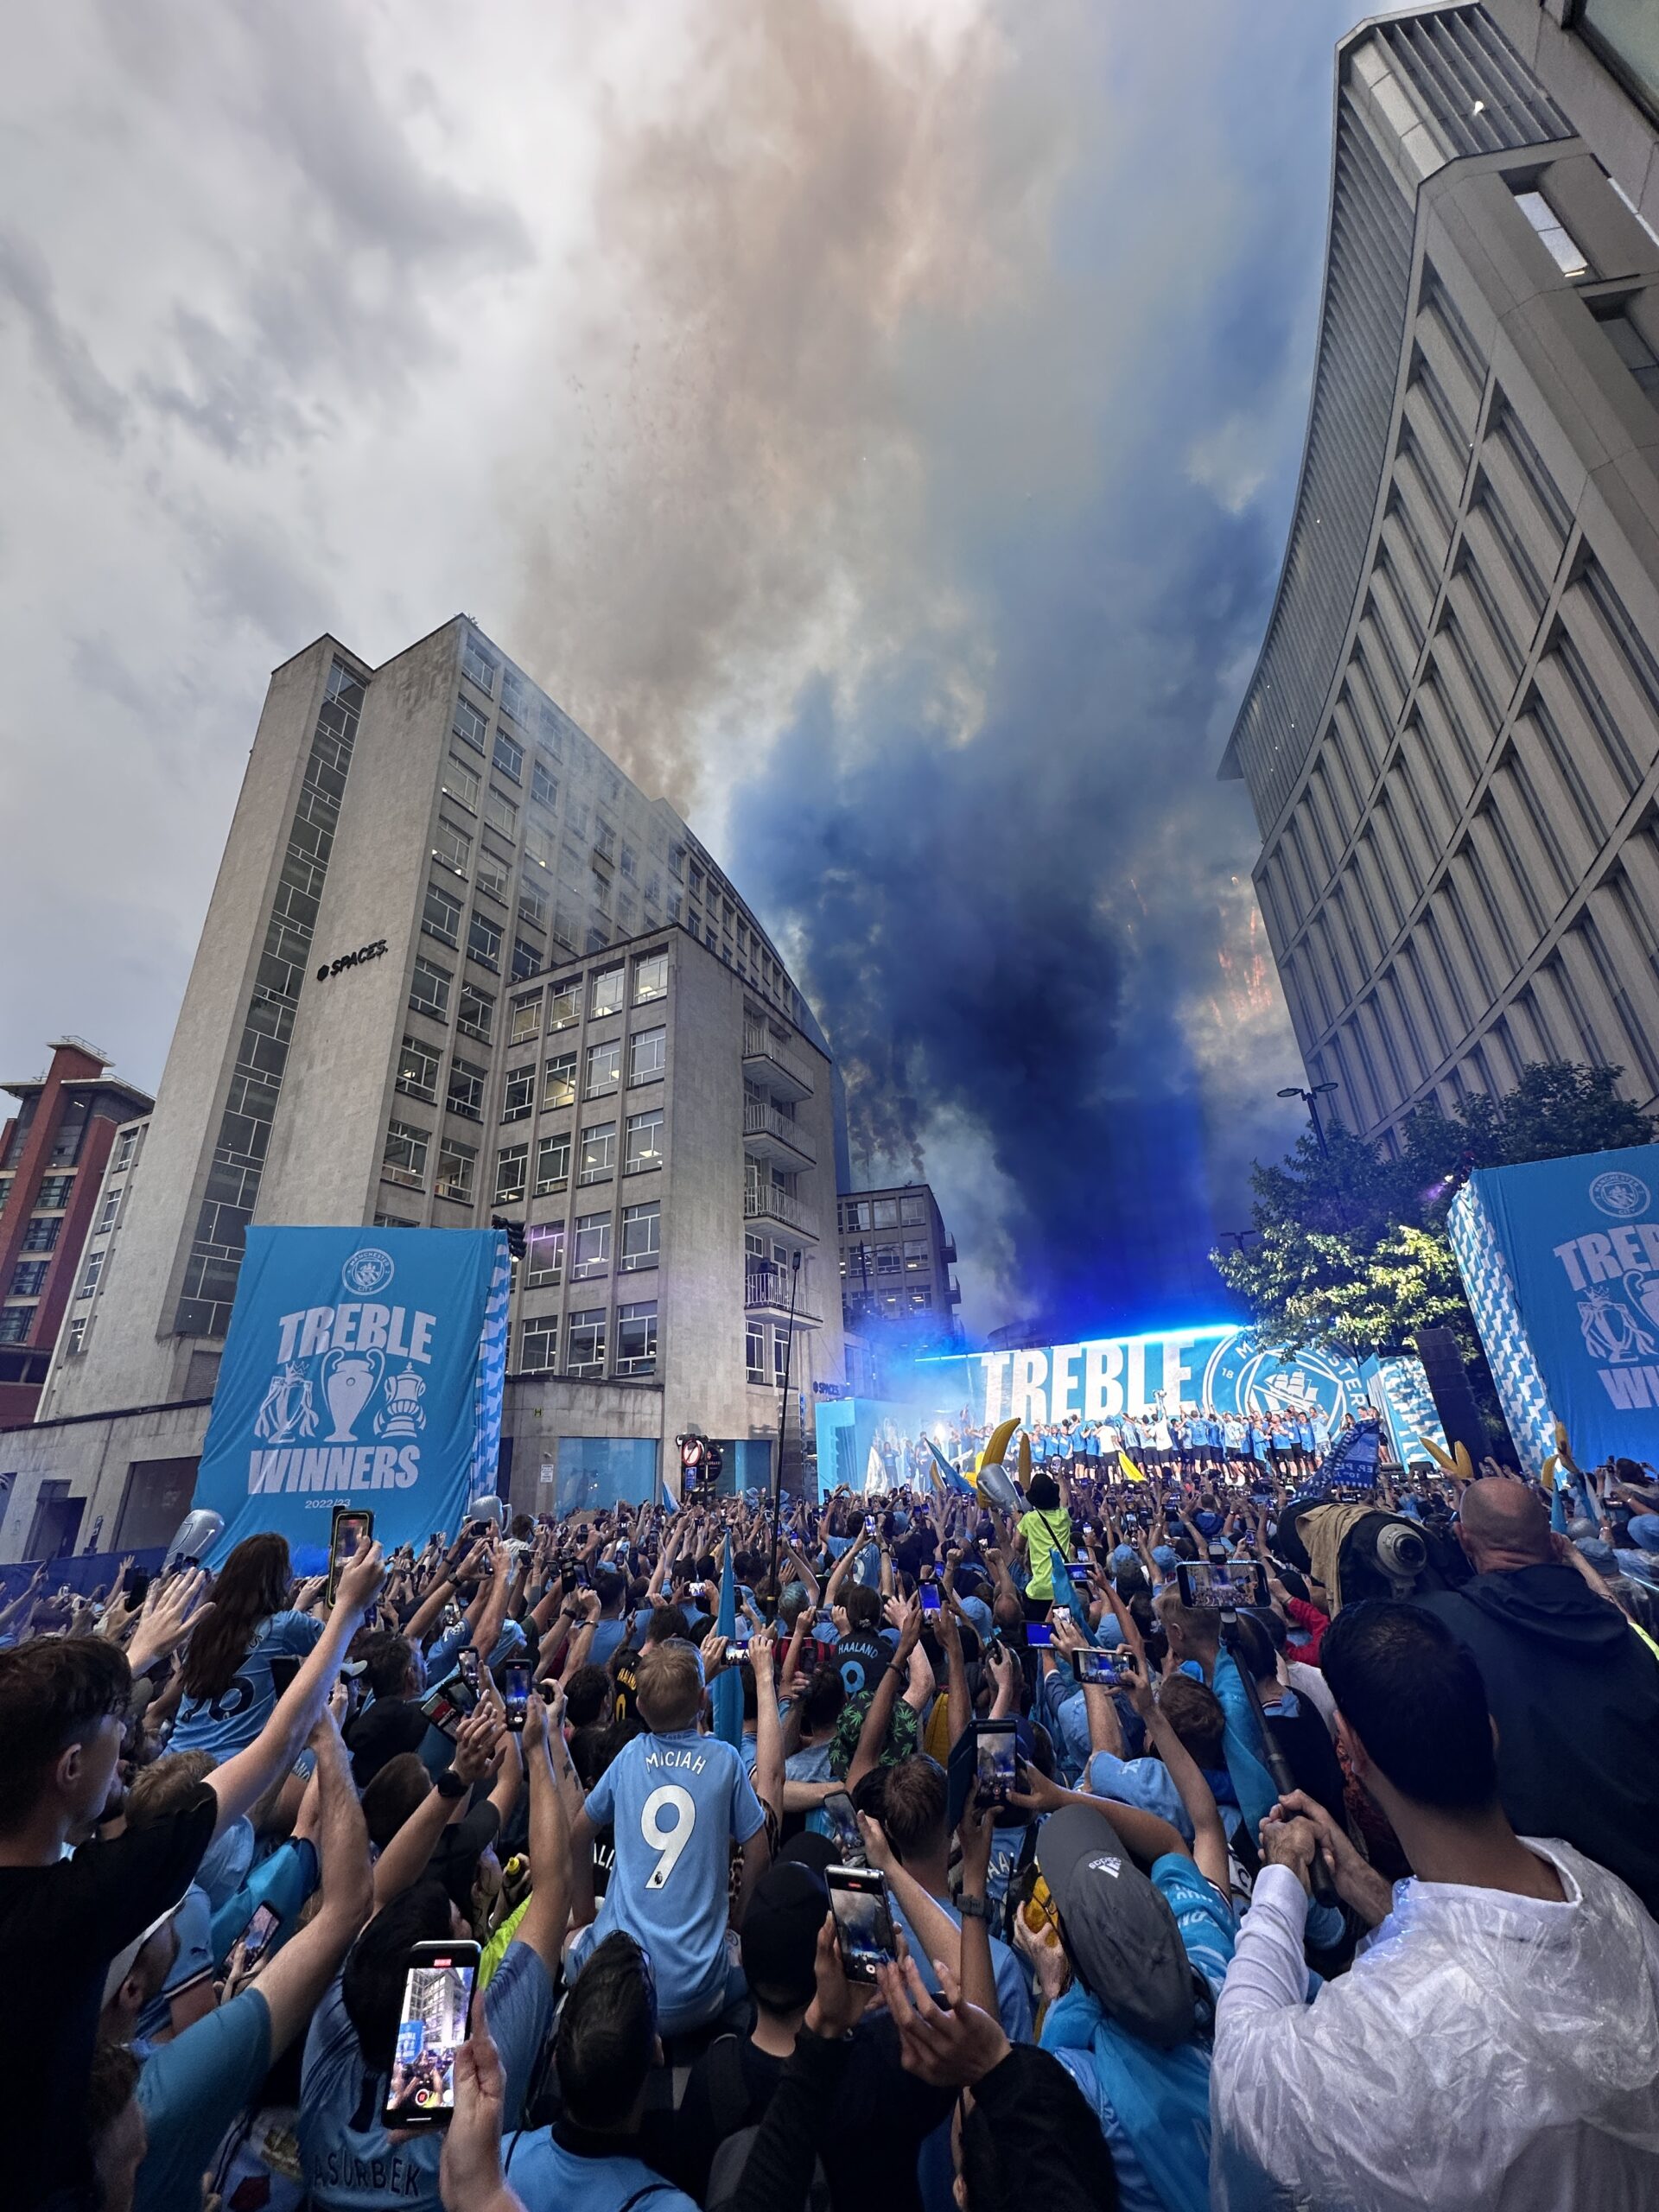 The Man City parade 2023 in image: a treble celebration in a thunderstorm